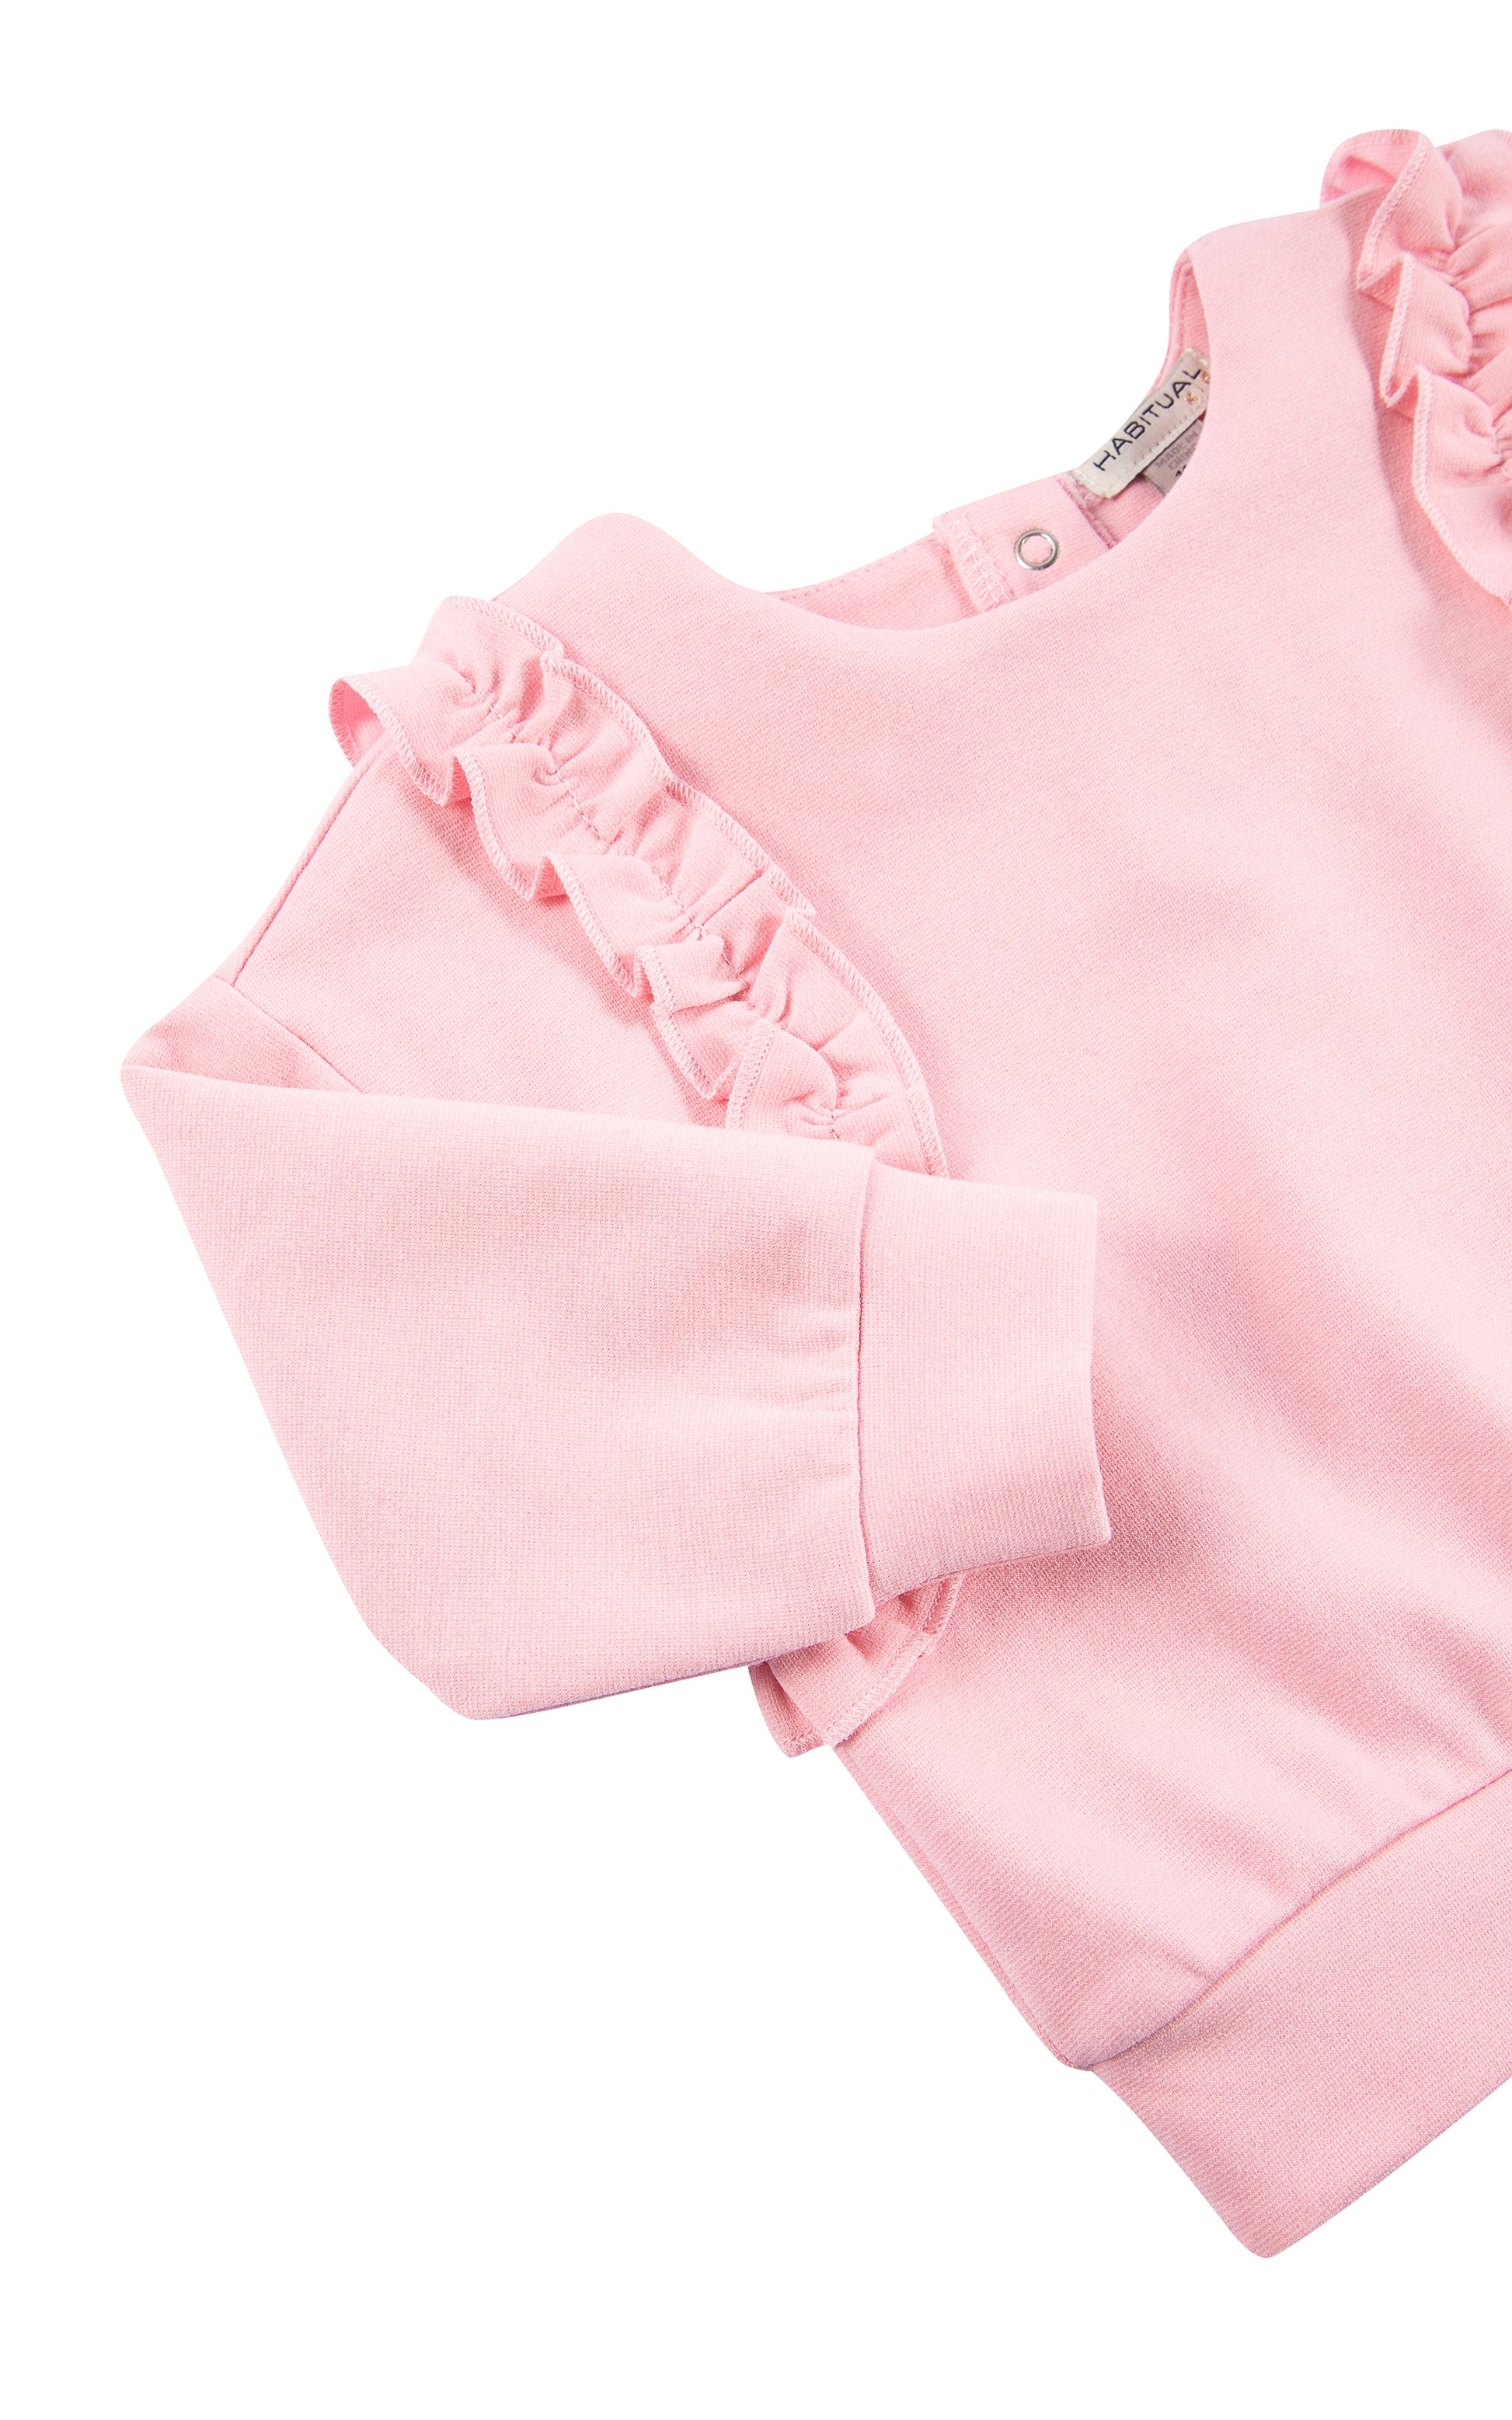 Close up view of top of pink ruched knit set with ruffles stitched from shoulder to mid-waist